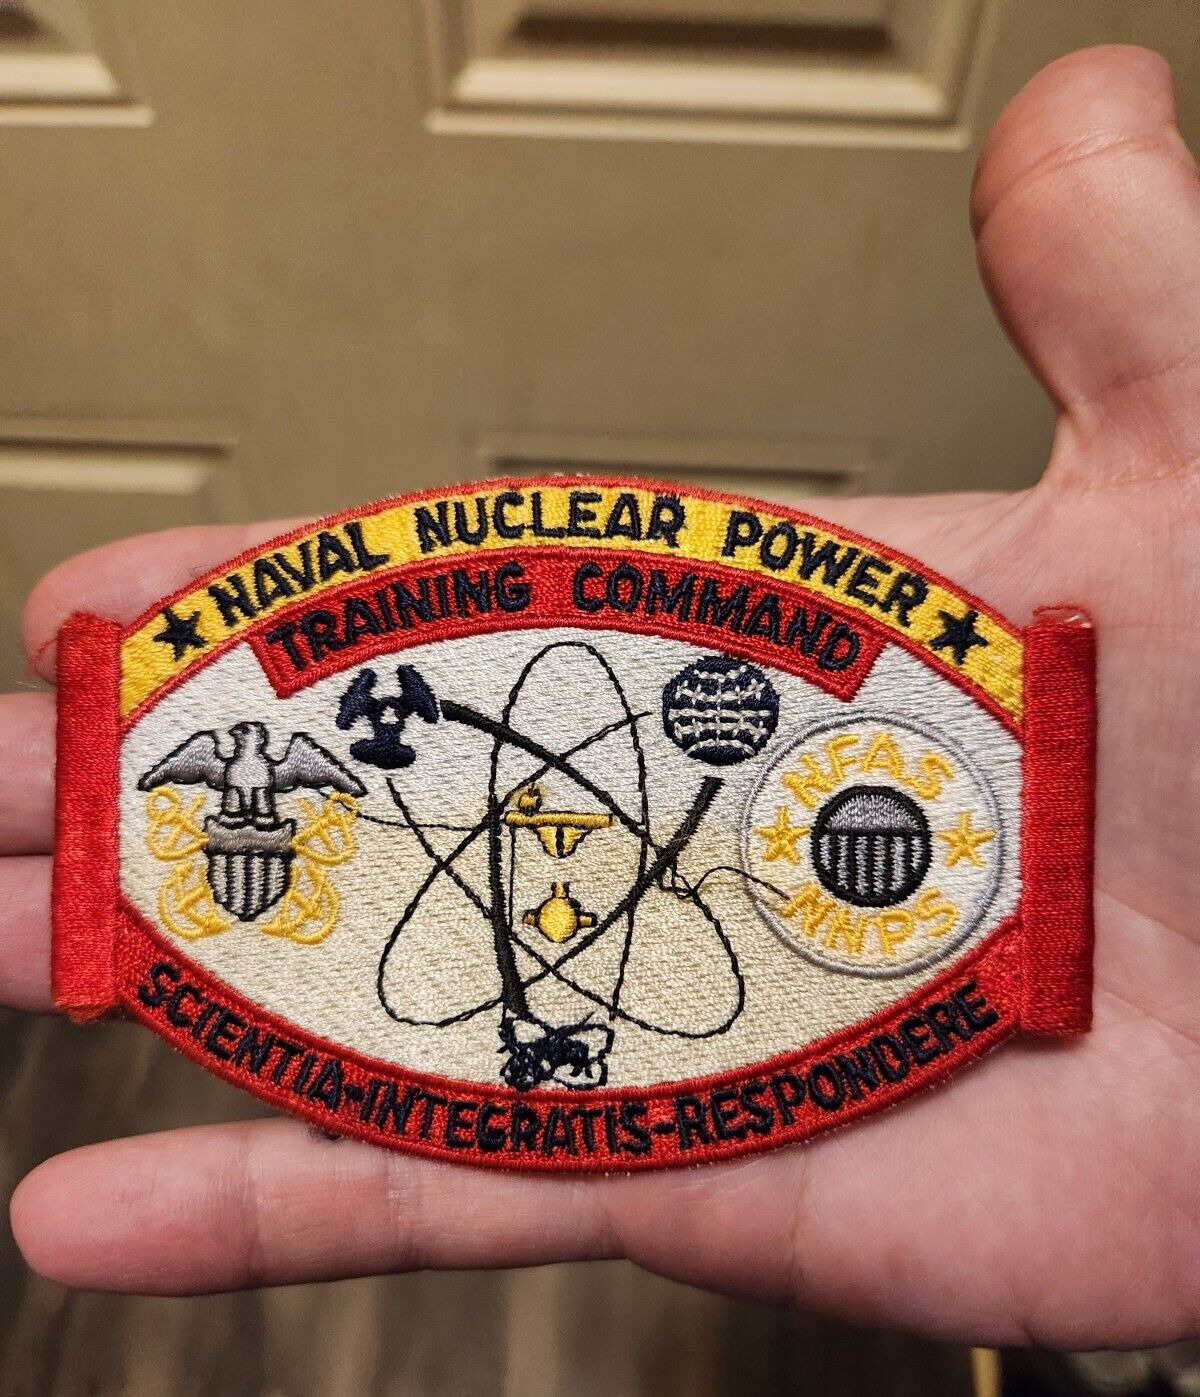 Navel Nuclear Power Training Center Patch